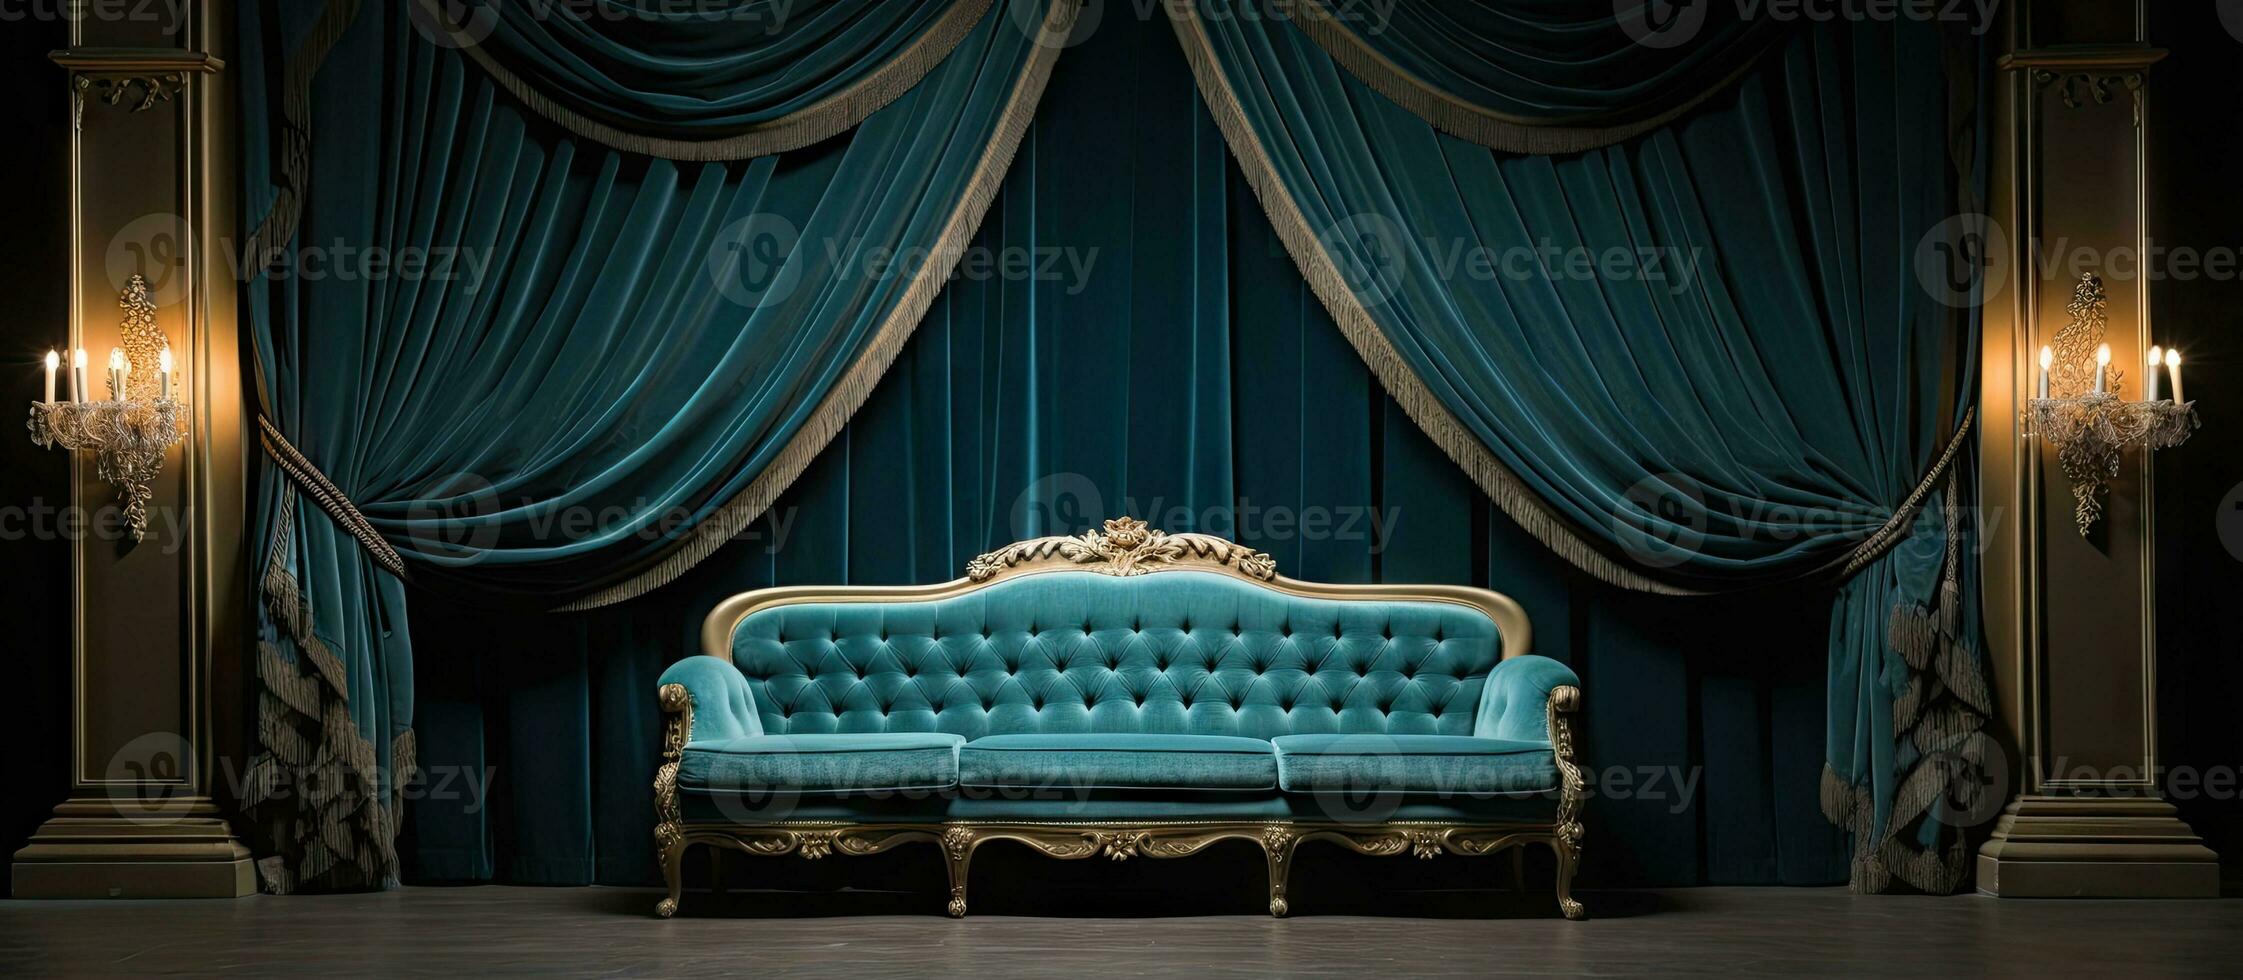 The stage is focused on a sofa with an elegant and comfortable design photo